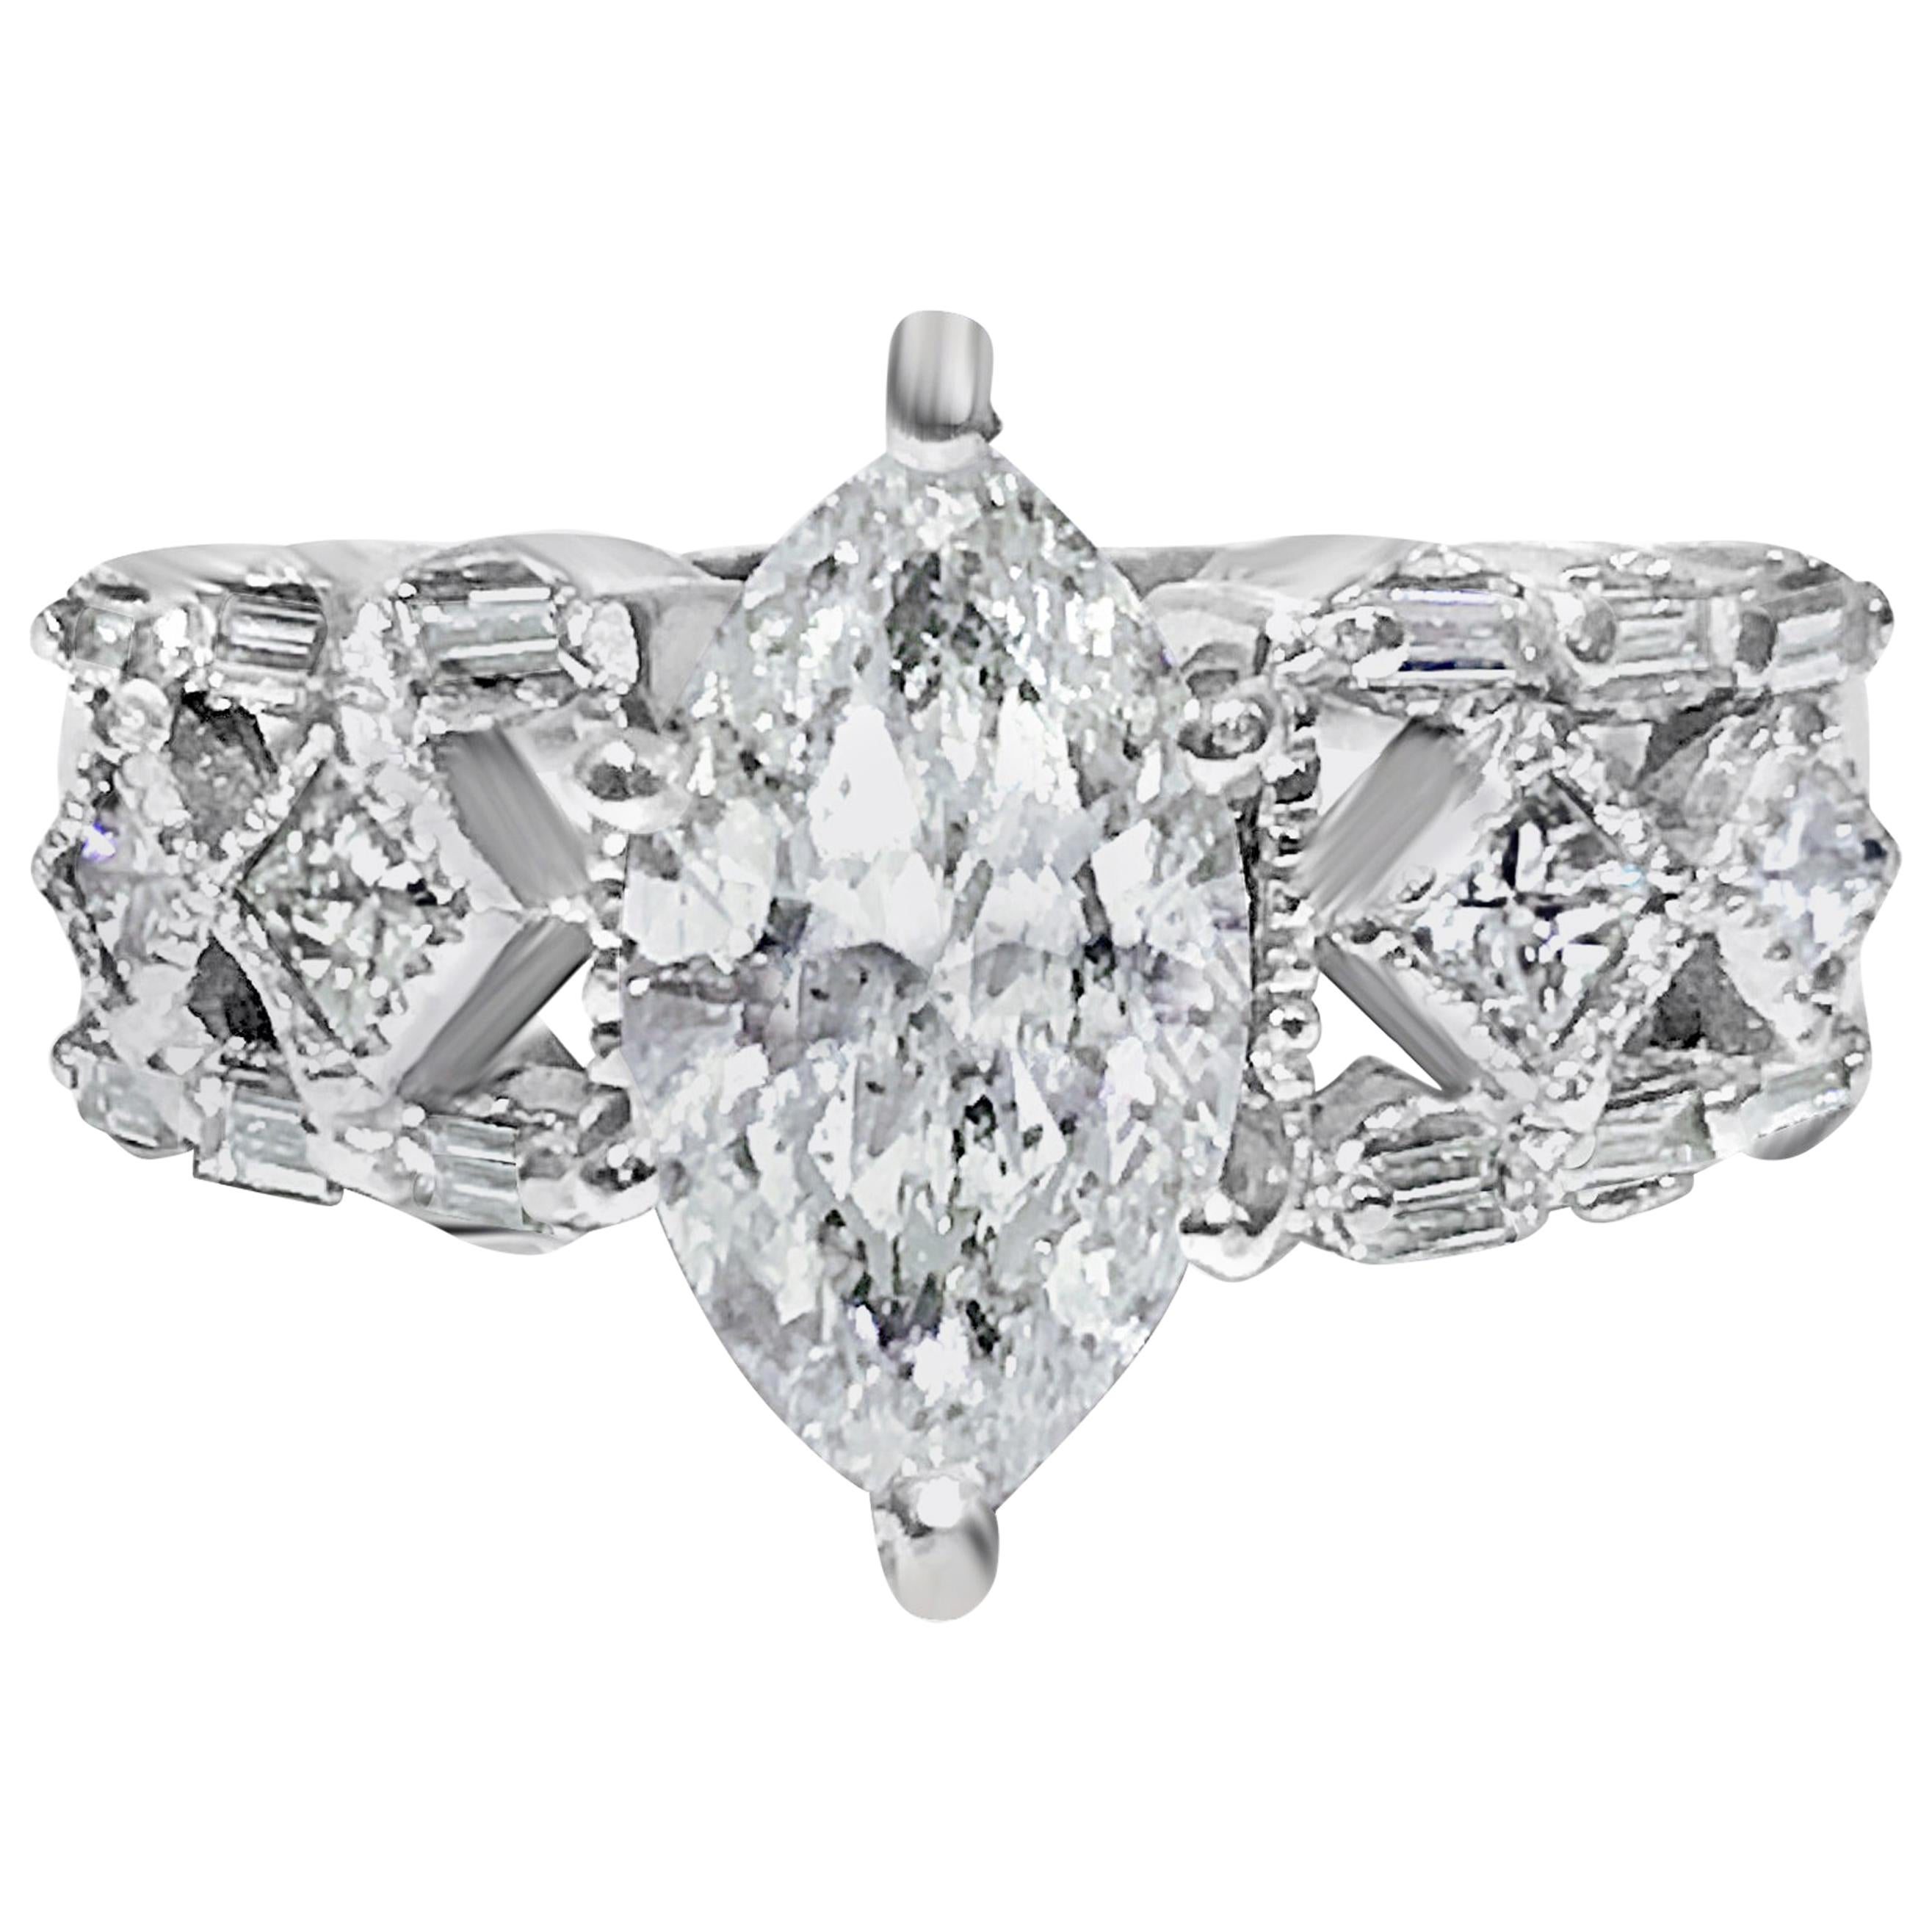 GIA Certified 2.35 Carat Diamond Engagement Ring For Sale